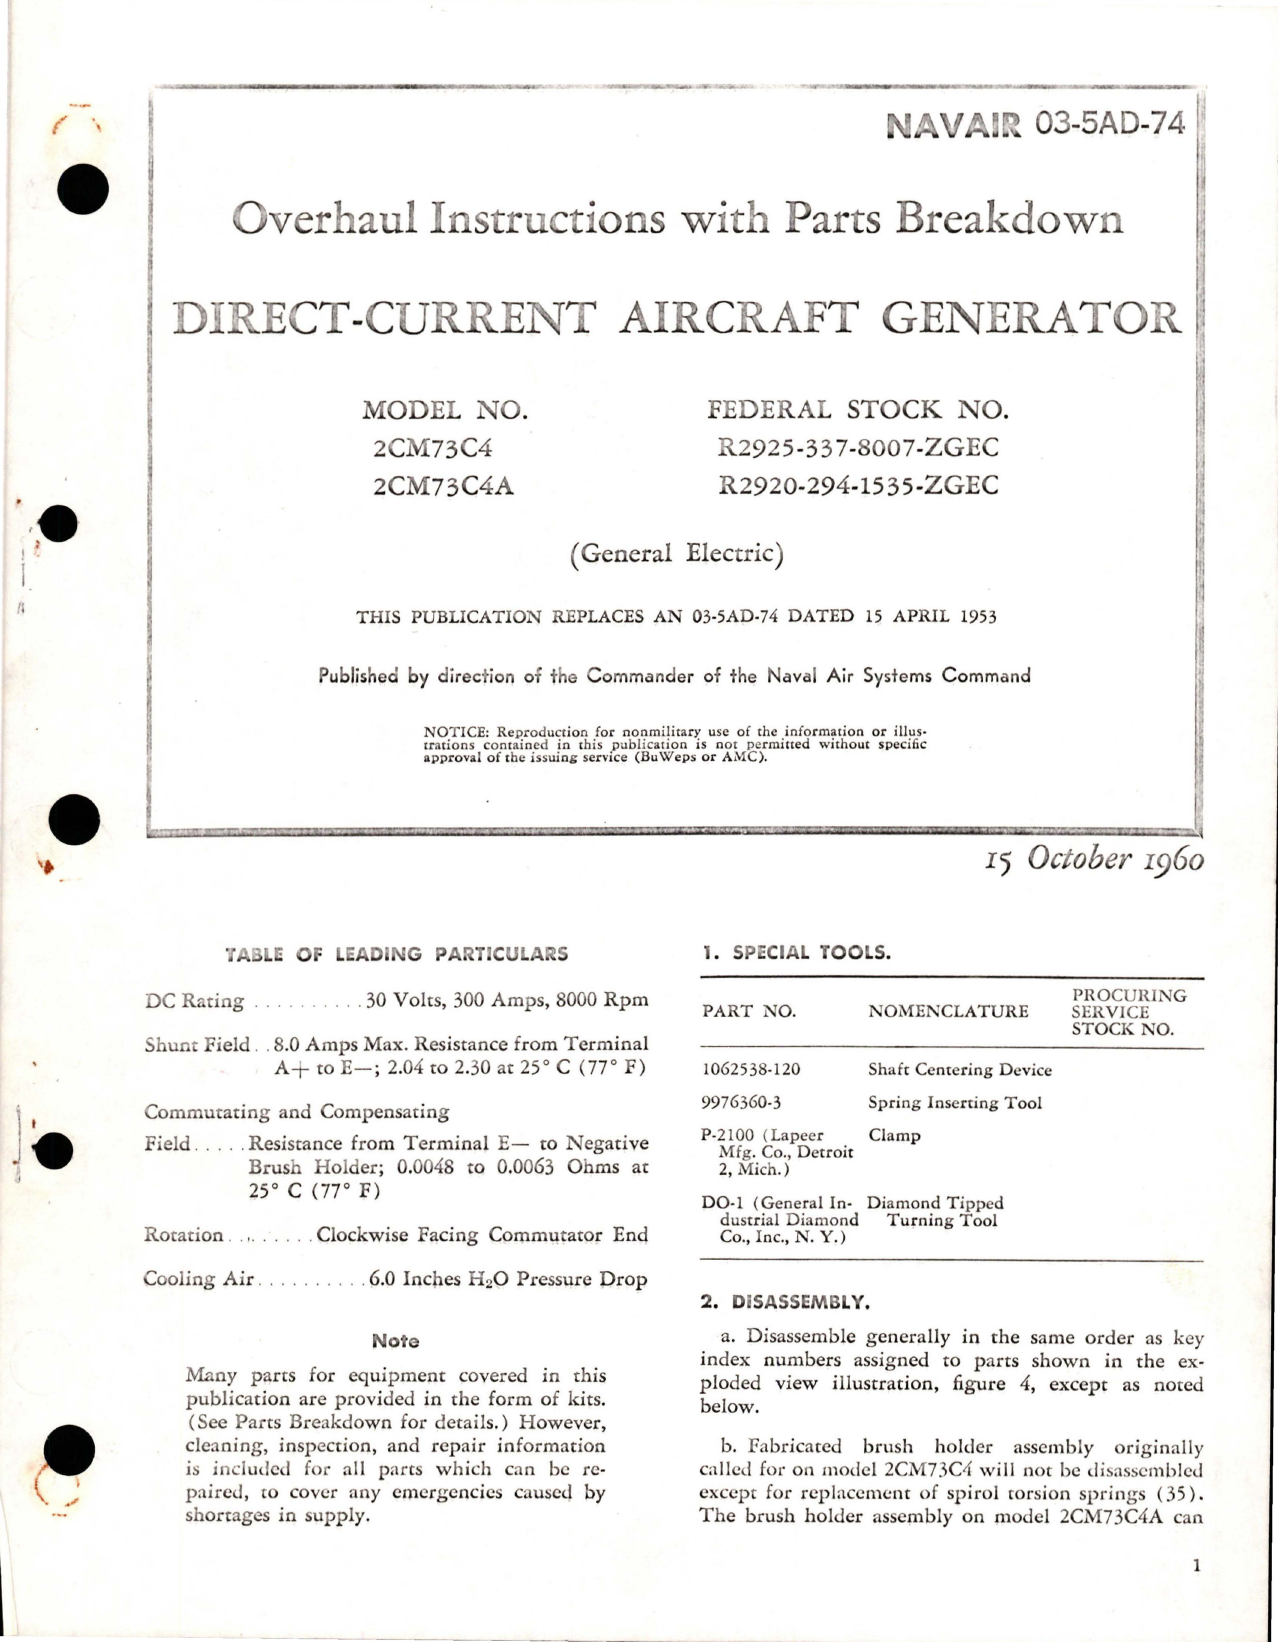 Sample page 1 from AirCorps Library document: Overhaul Instructions with Parts for Direct Current Aircraft Generator - Models 2CM73C4 and 2CM73C4A 